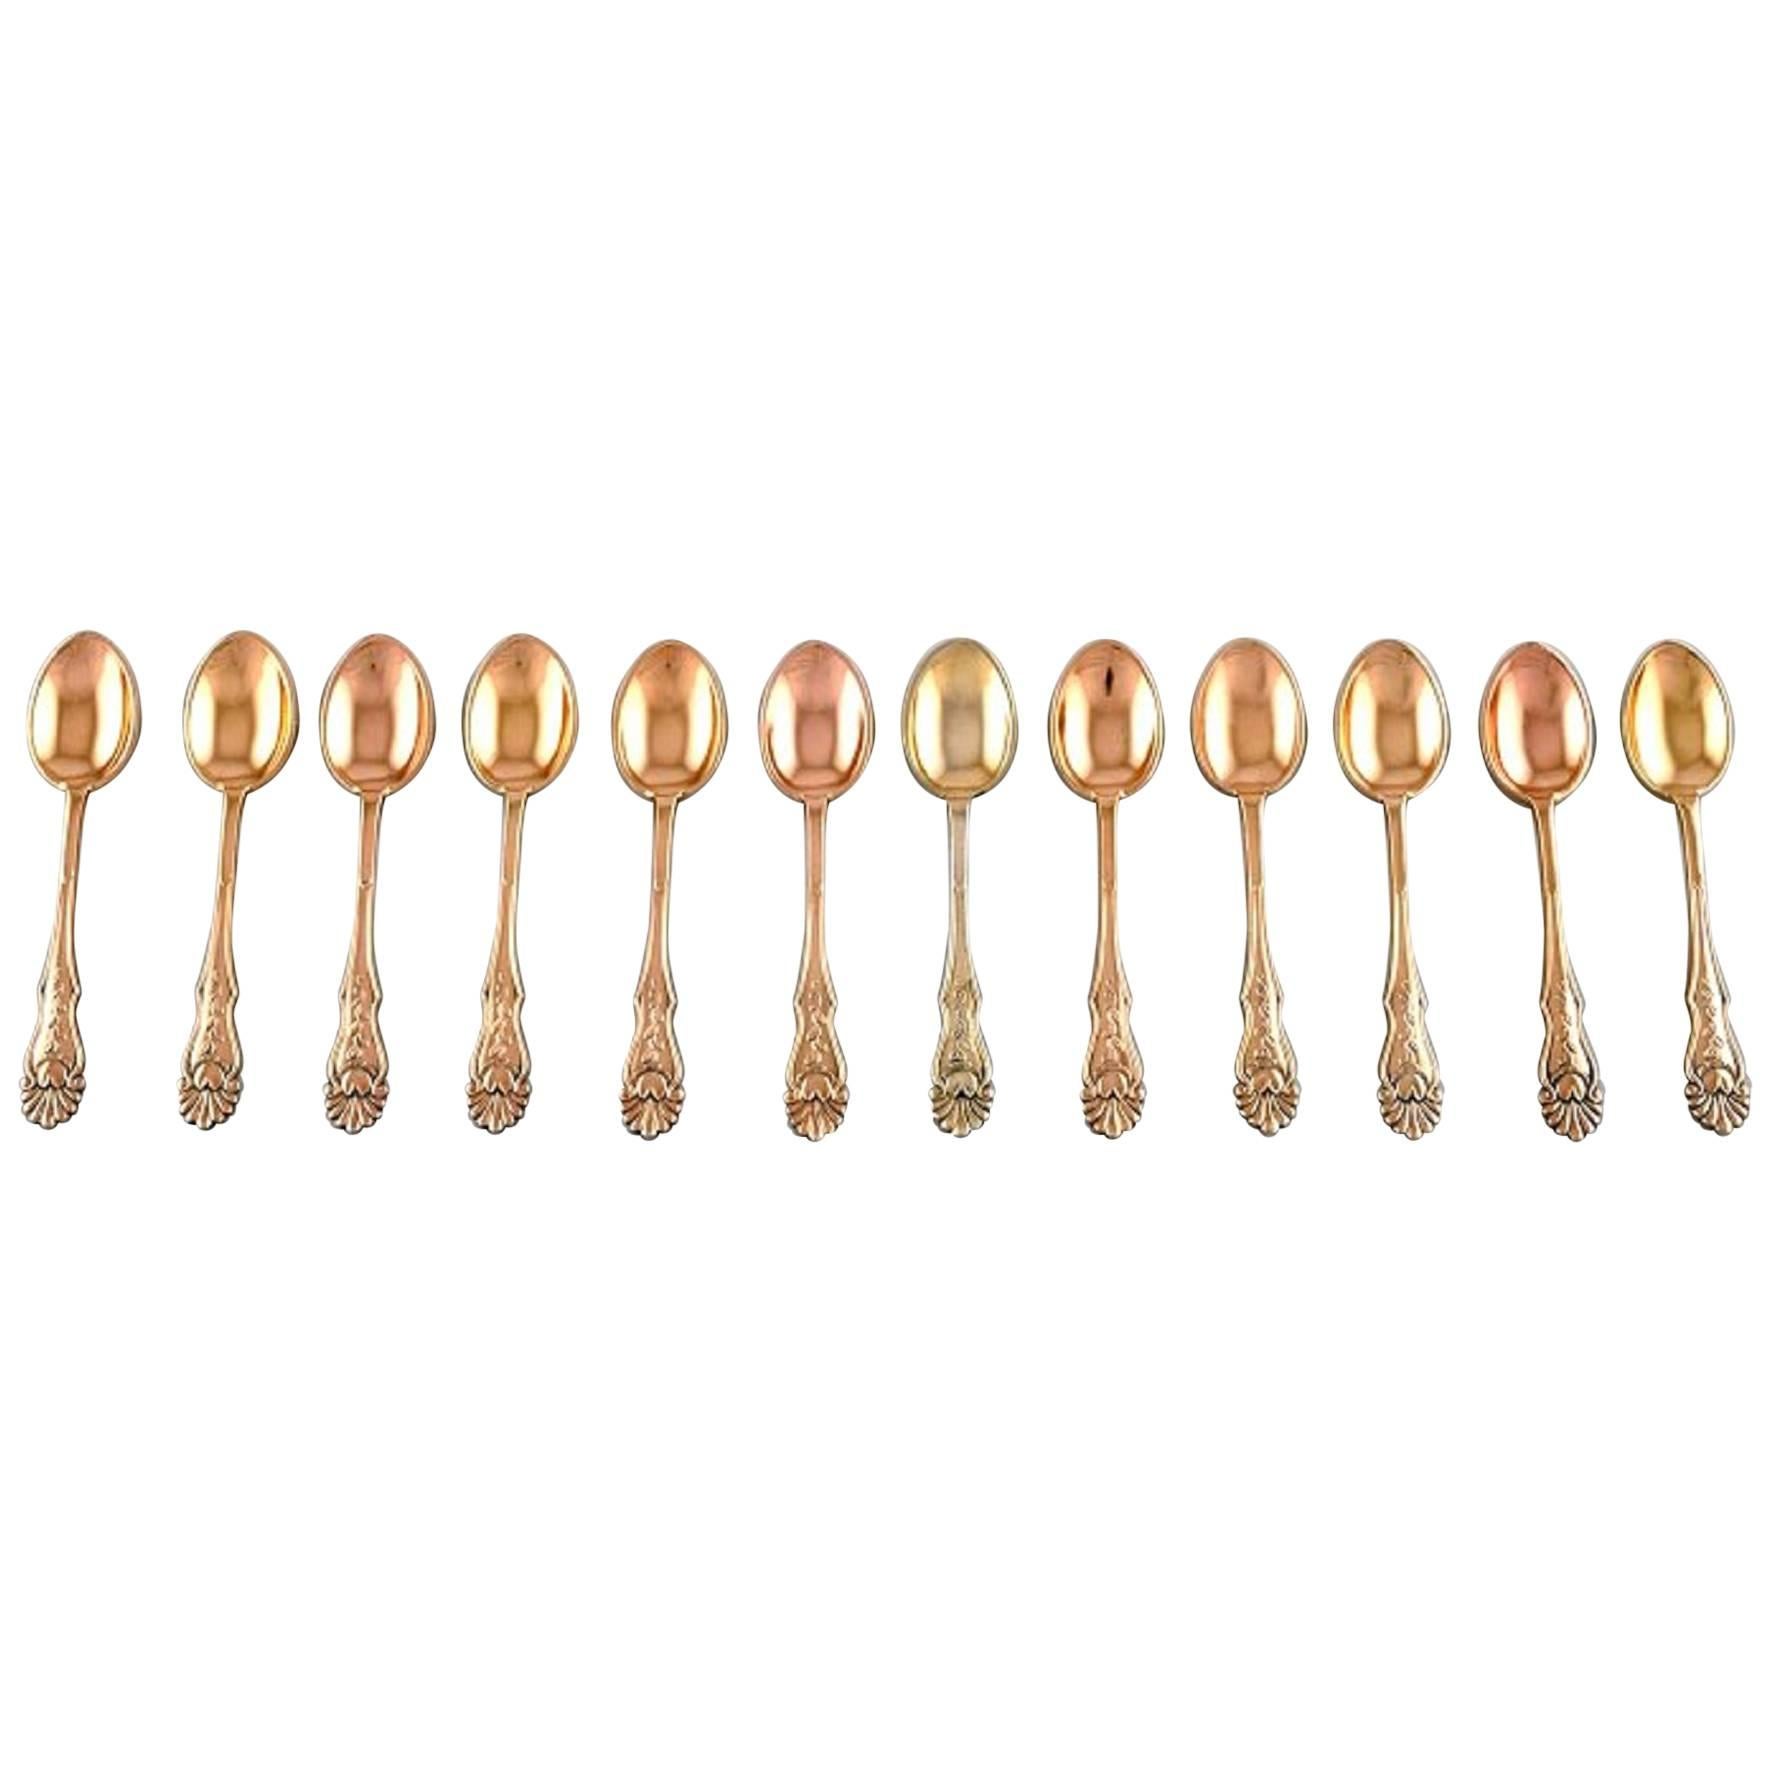 12 Danish Mocha Spoons in Gilded Silver, Approximate 1930s For Sale